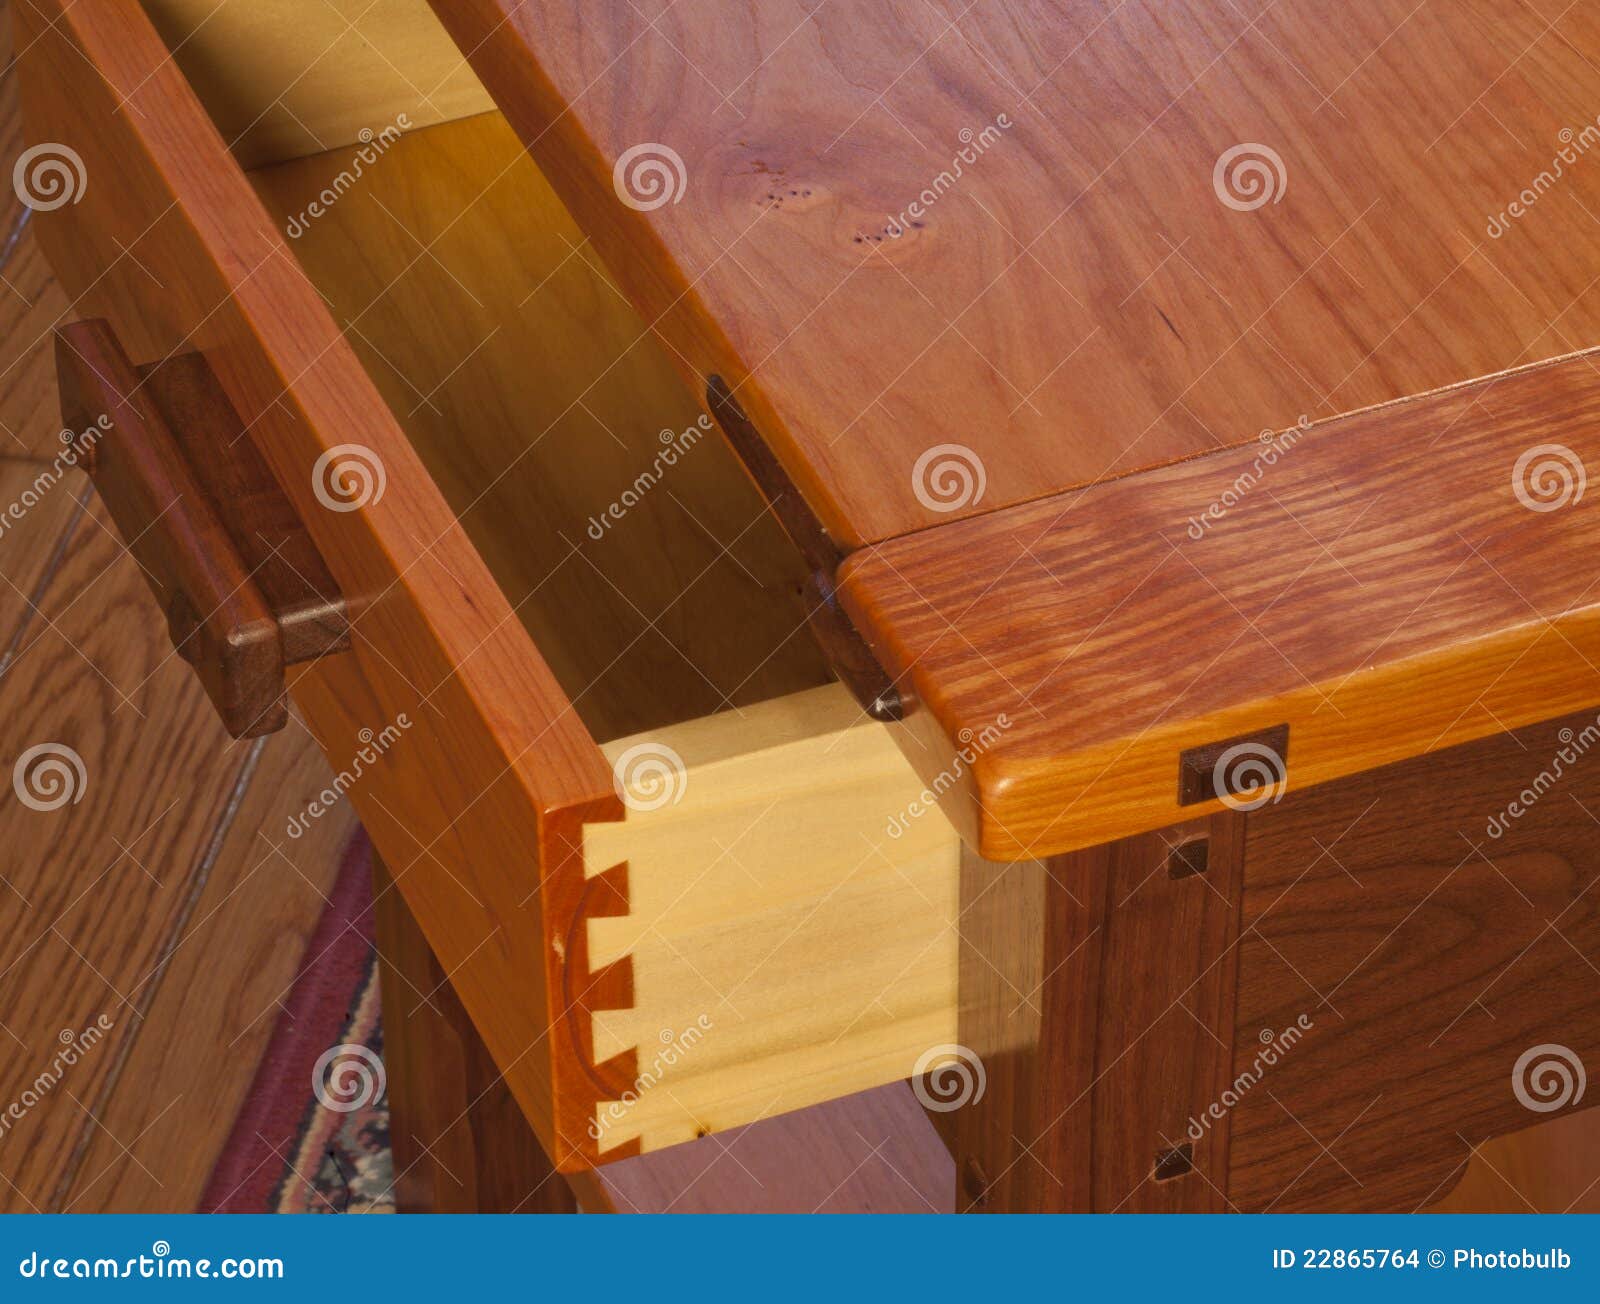 Wooden Dovetail Joinery Stock Images - Image: 22865764